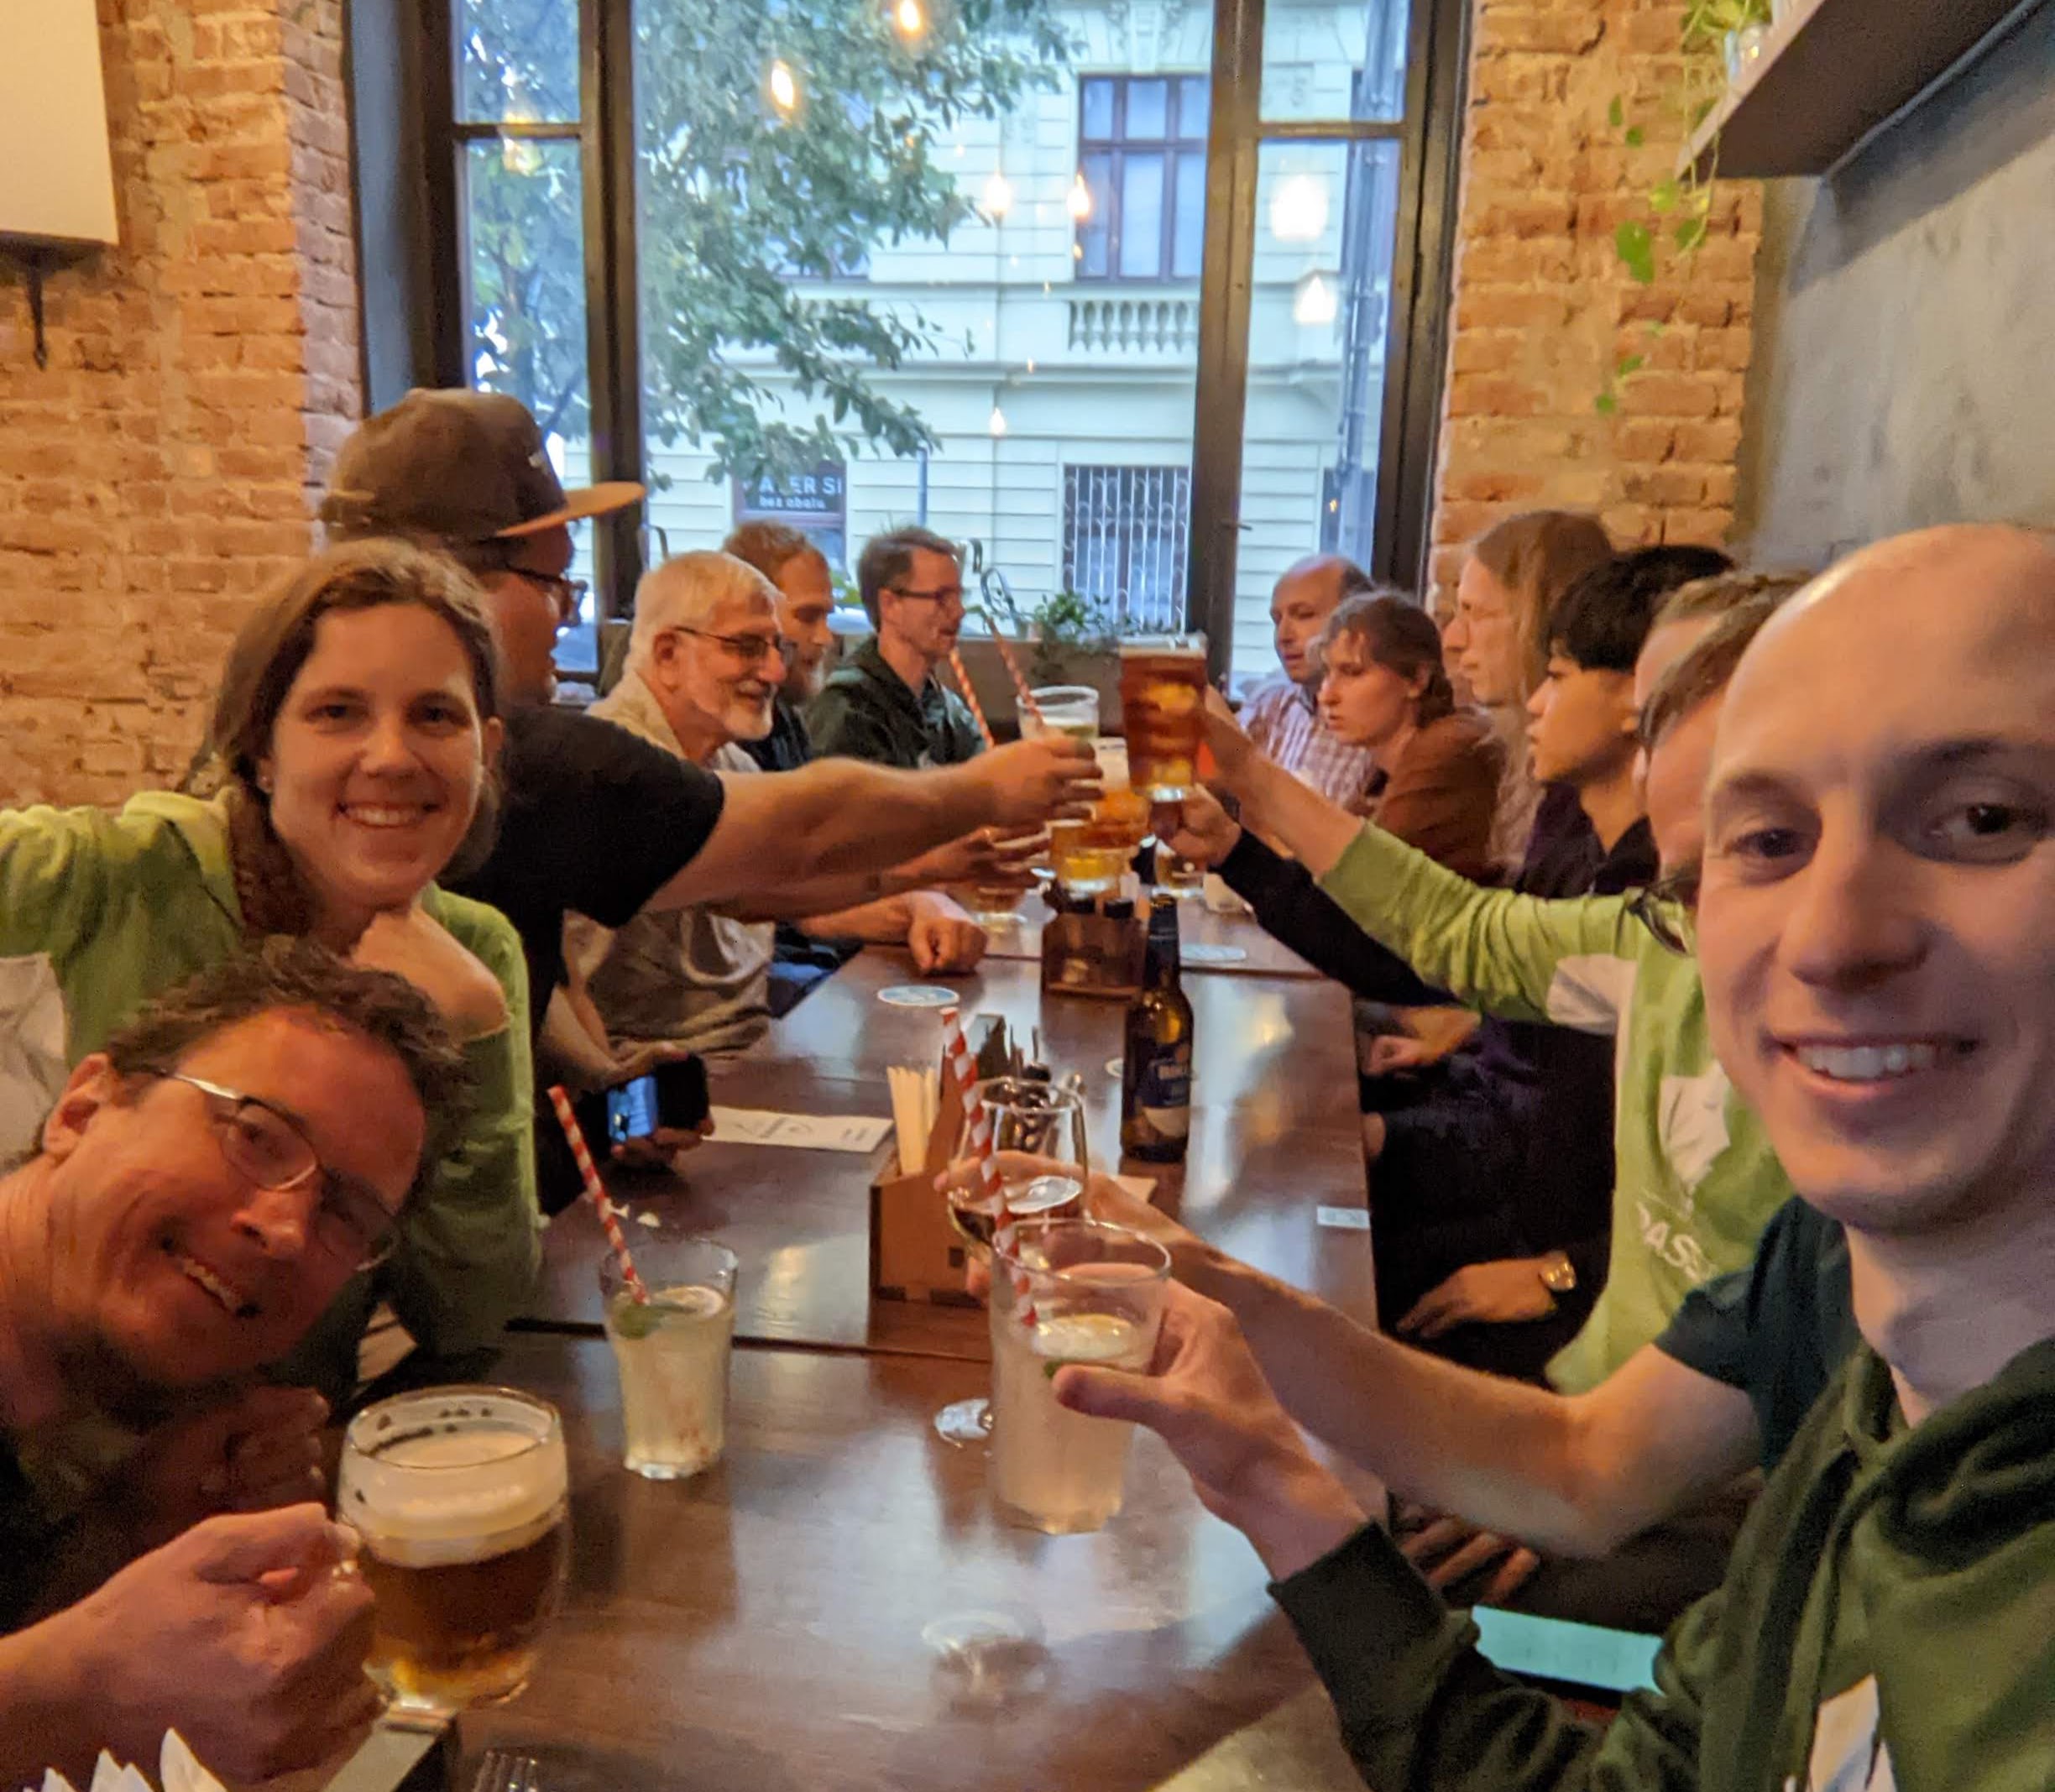 A toast to GRASS GIS's 40th Birthday and a successful meeting